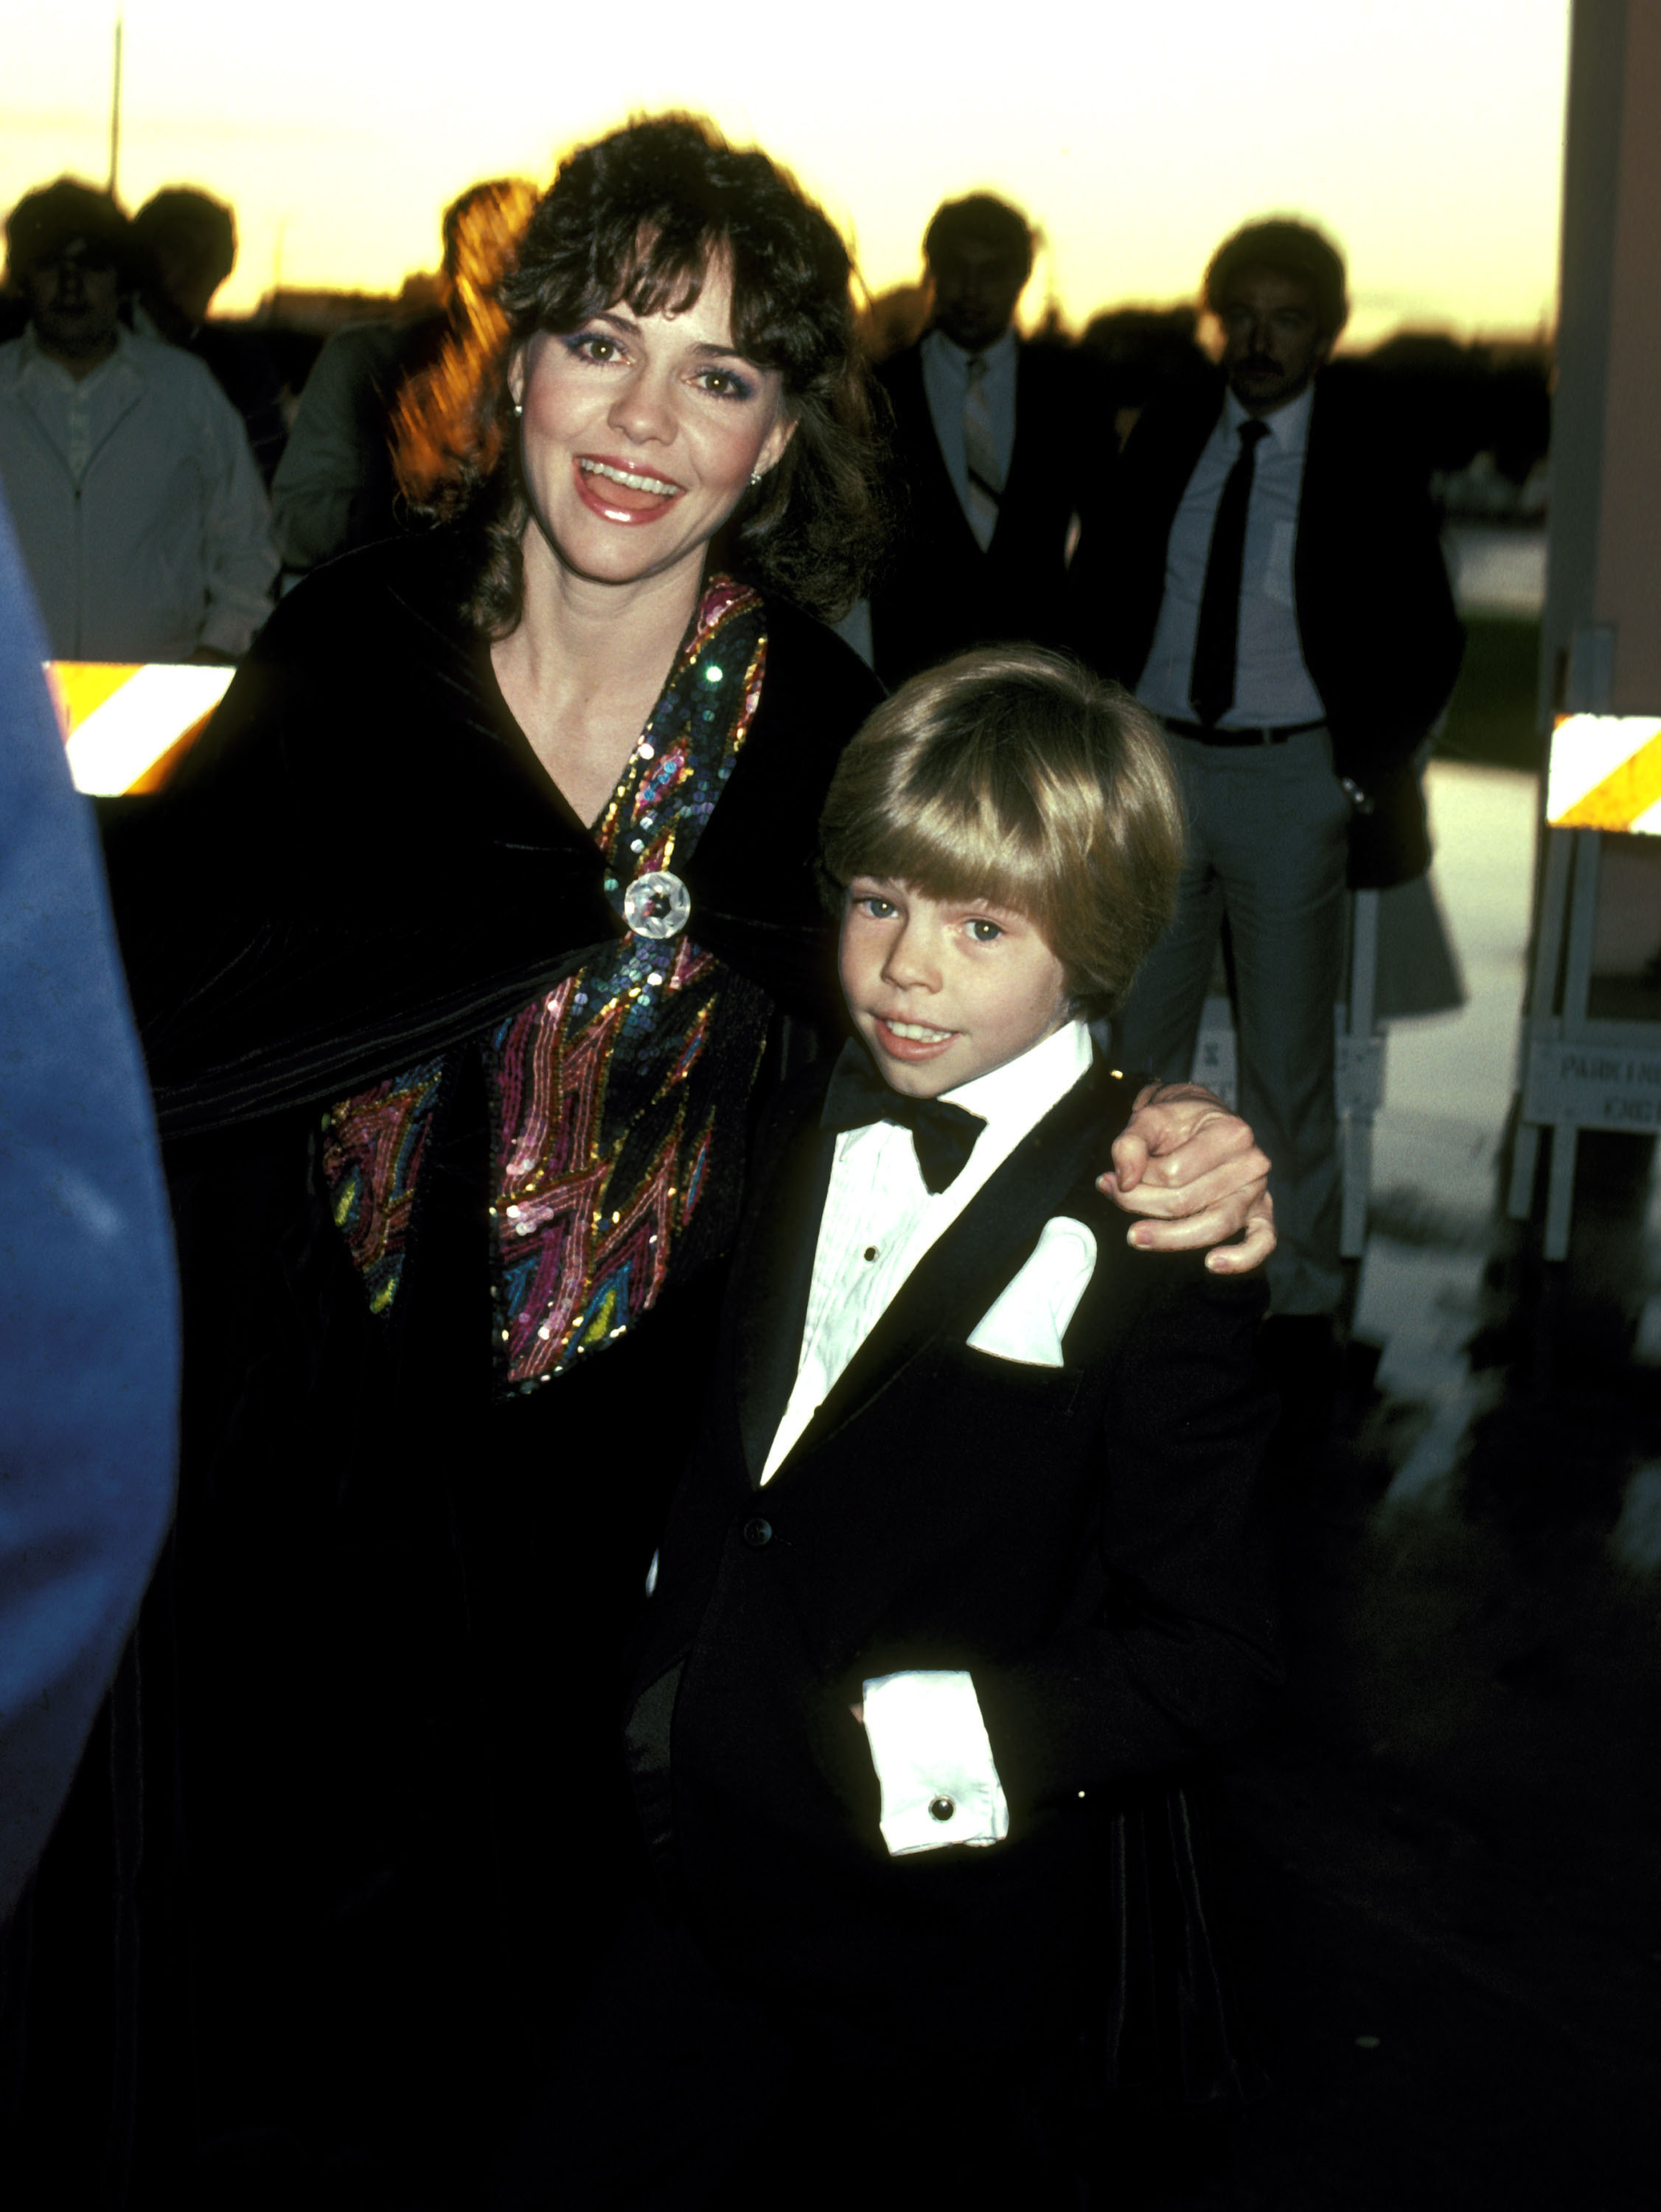 Sally Field and Peter Craig at the 8th Annual People's Choice Awards in Santa Monica, California in 1982. | Source: Getty Images